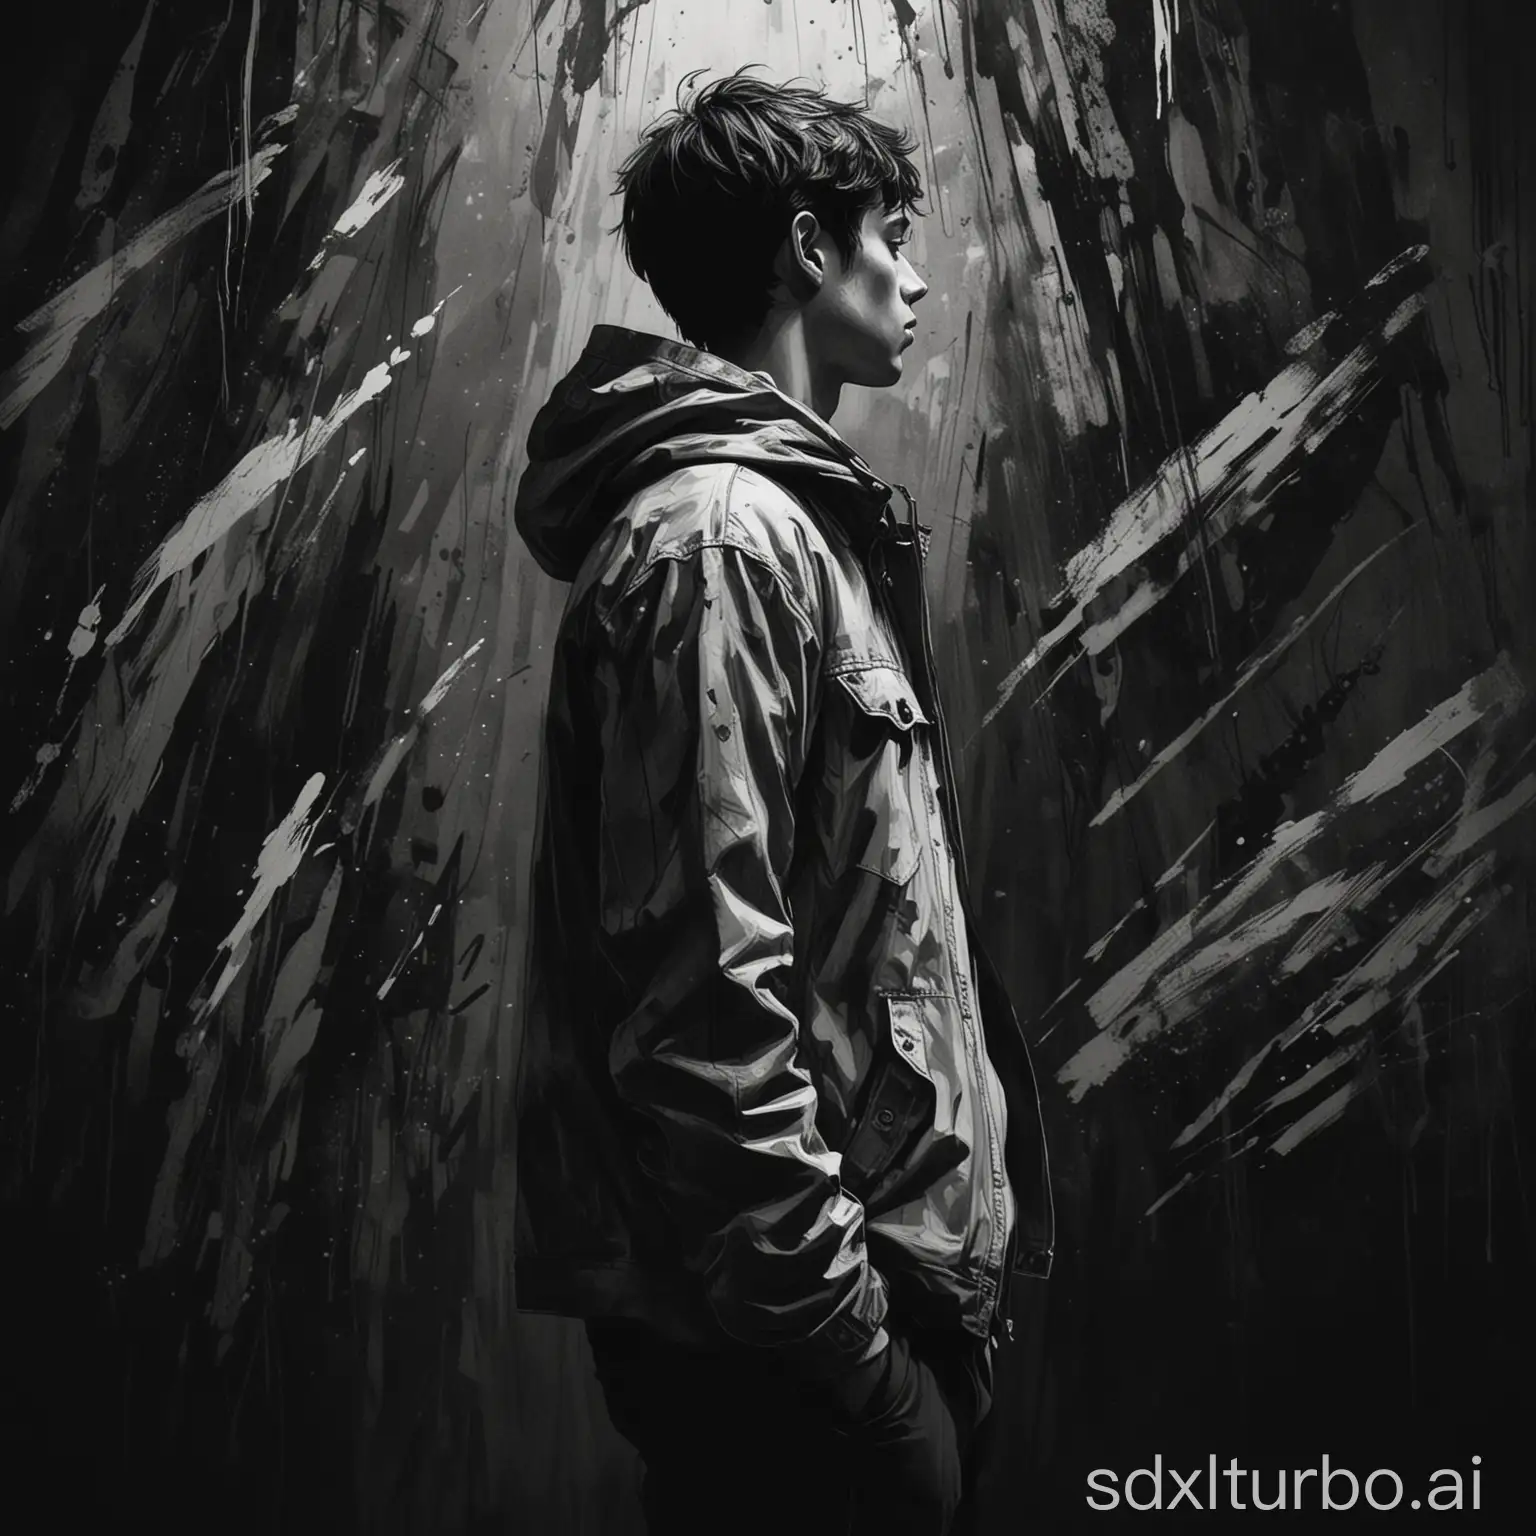 Stylized-Black-and-White-Illustration-of-an-Introverted-Young-Person